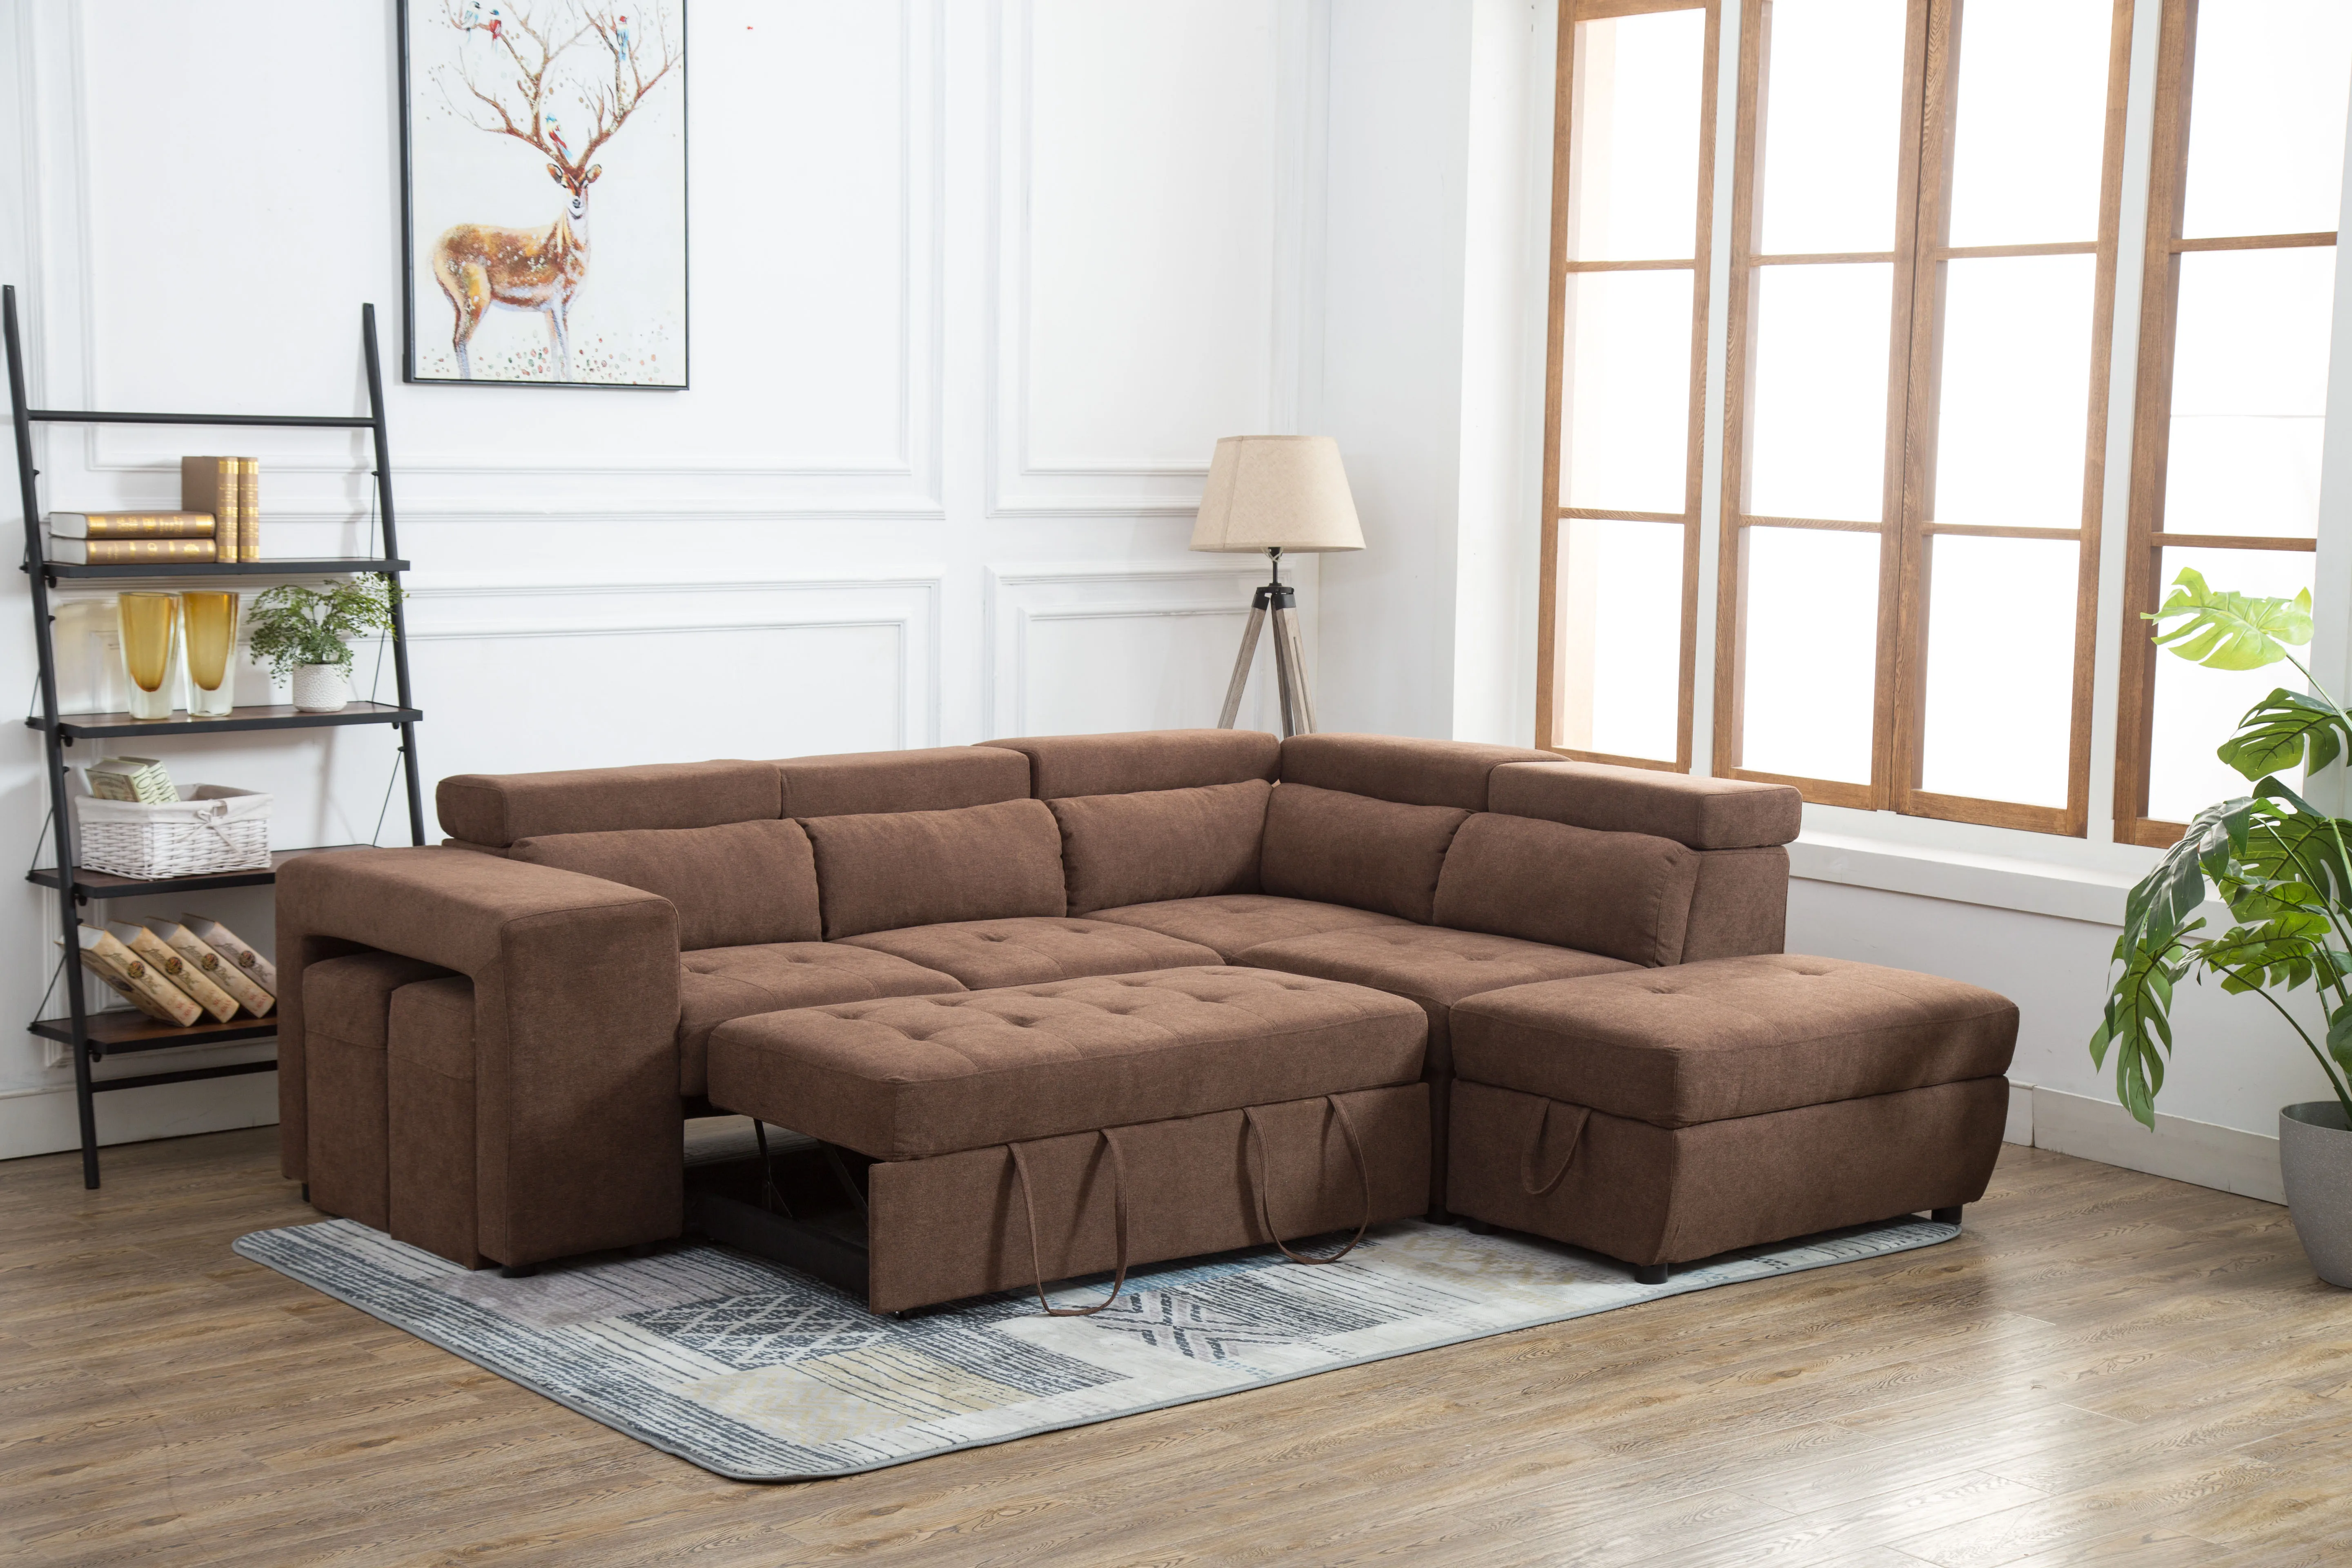 Compliance to Bot Belong Frank Furniture Wholesale Sofa Bed L Shaped Cama Sectional Sofa Bed Folding  New Model Living Room Sofa - Buy Sofa Bed Folding,Living Room Sofa,Sofa Cum  Bed Product on Alibaba.com